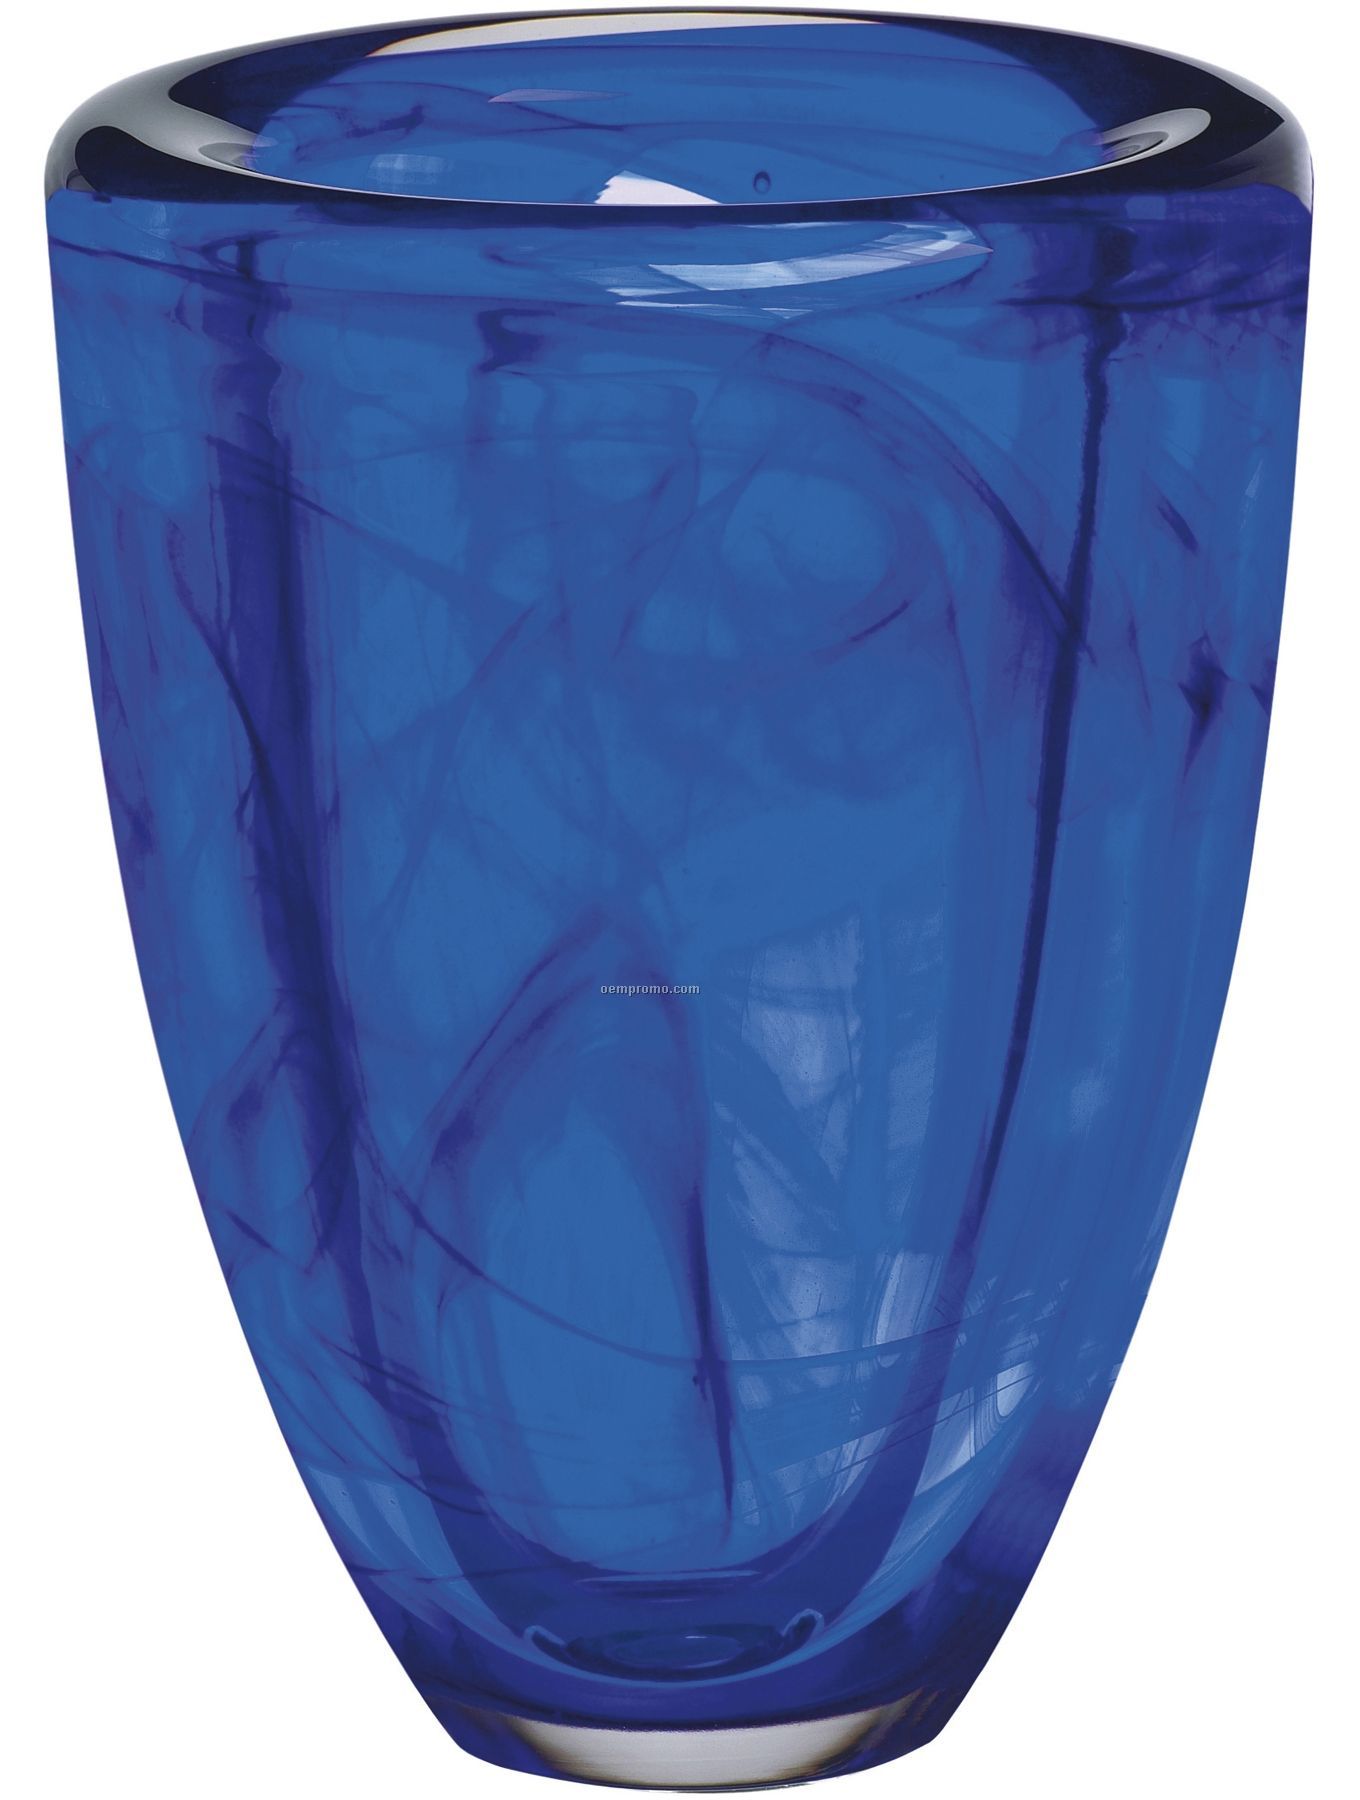 Atoll Marble Look Glass Vase By Anna Ehrner (Blue)